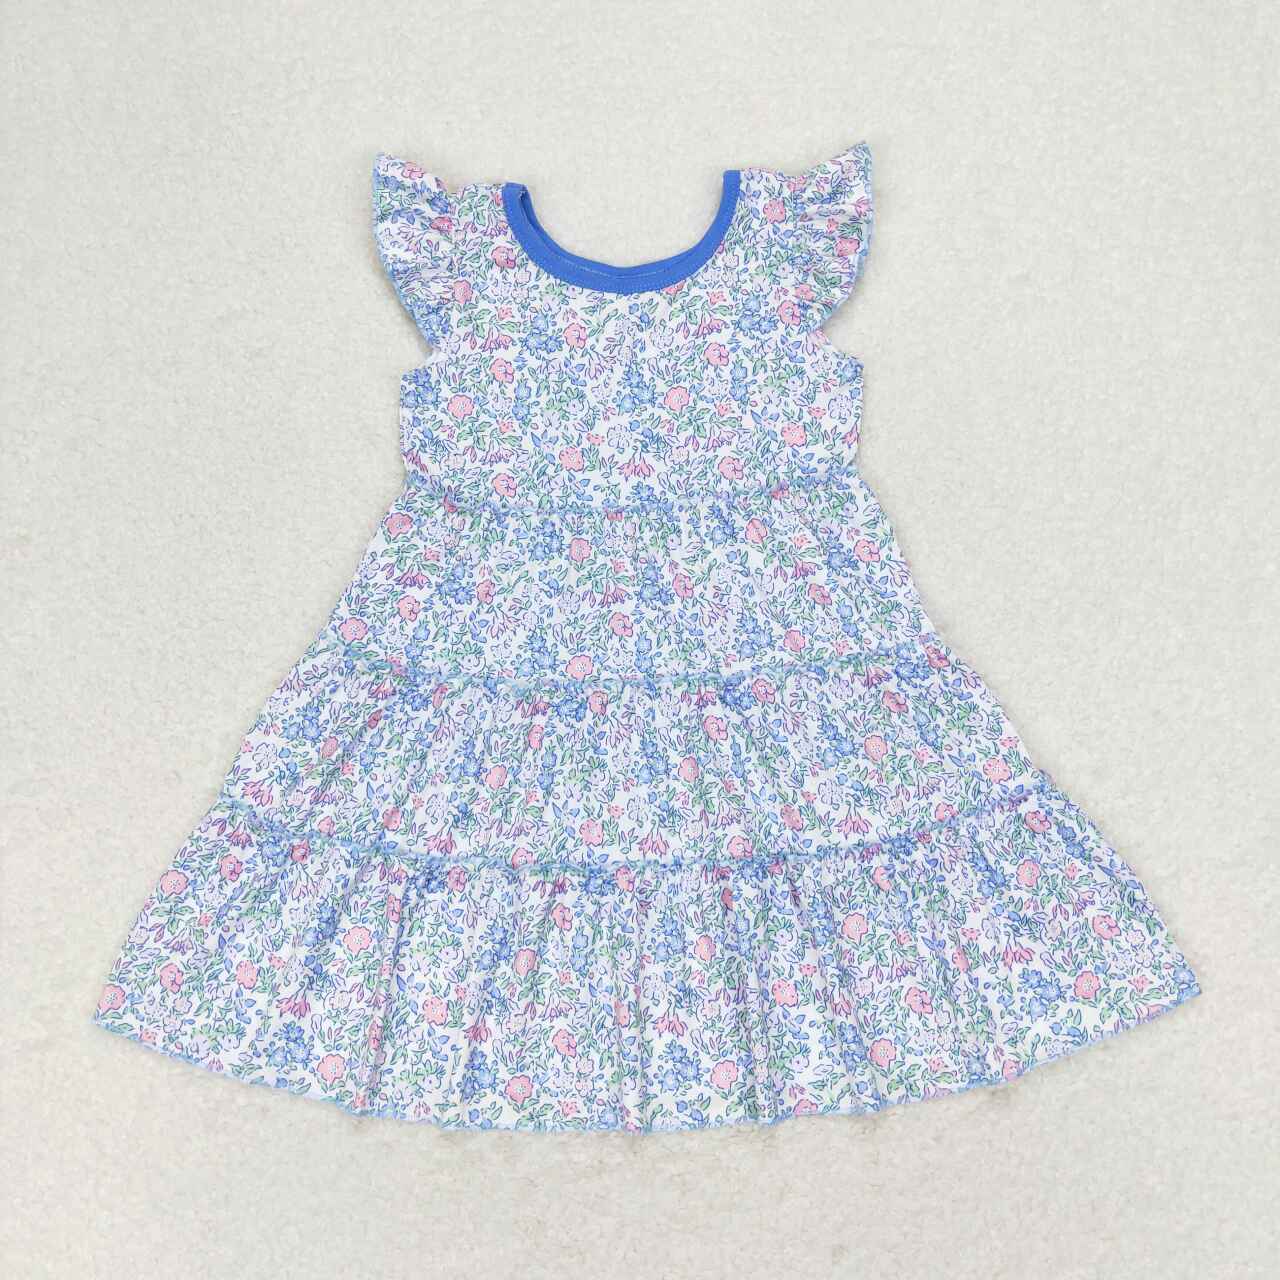 GSD1043 Floral floral blue and purple flying sleeve dress